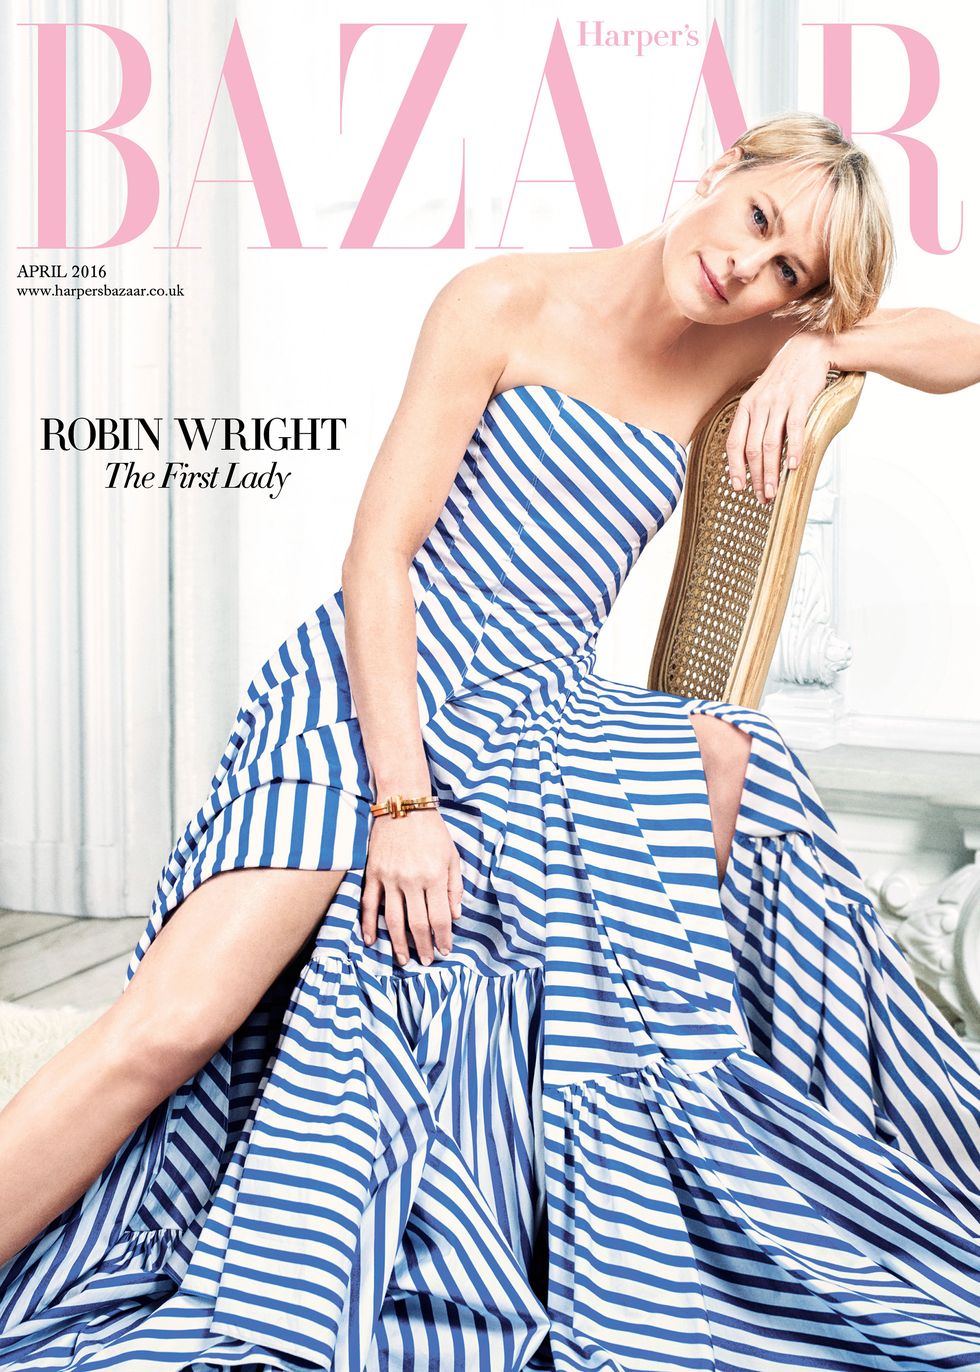 Robin Wright April 2016 issue cover Harper's Bazaar  - subscribers' edition